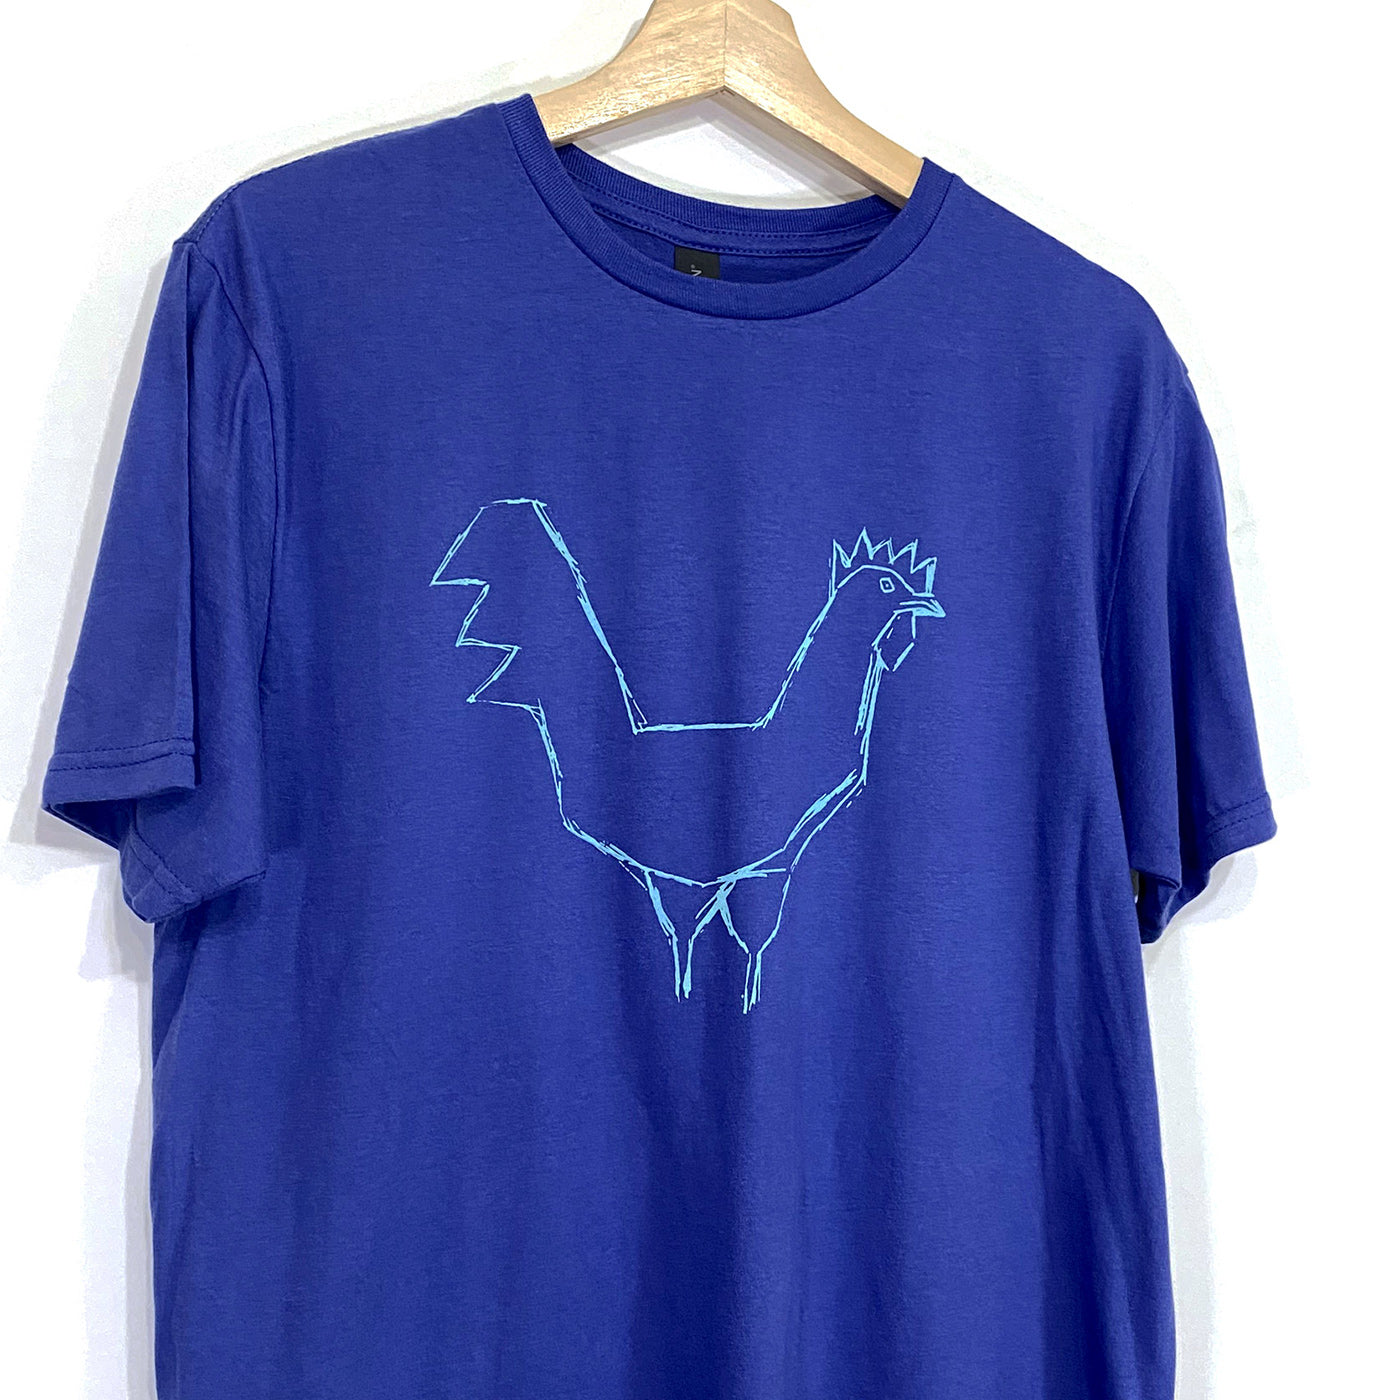 A rough drawing of a chicken silkscreen on a royal blue short sleeved tee with a crew neck